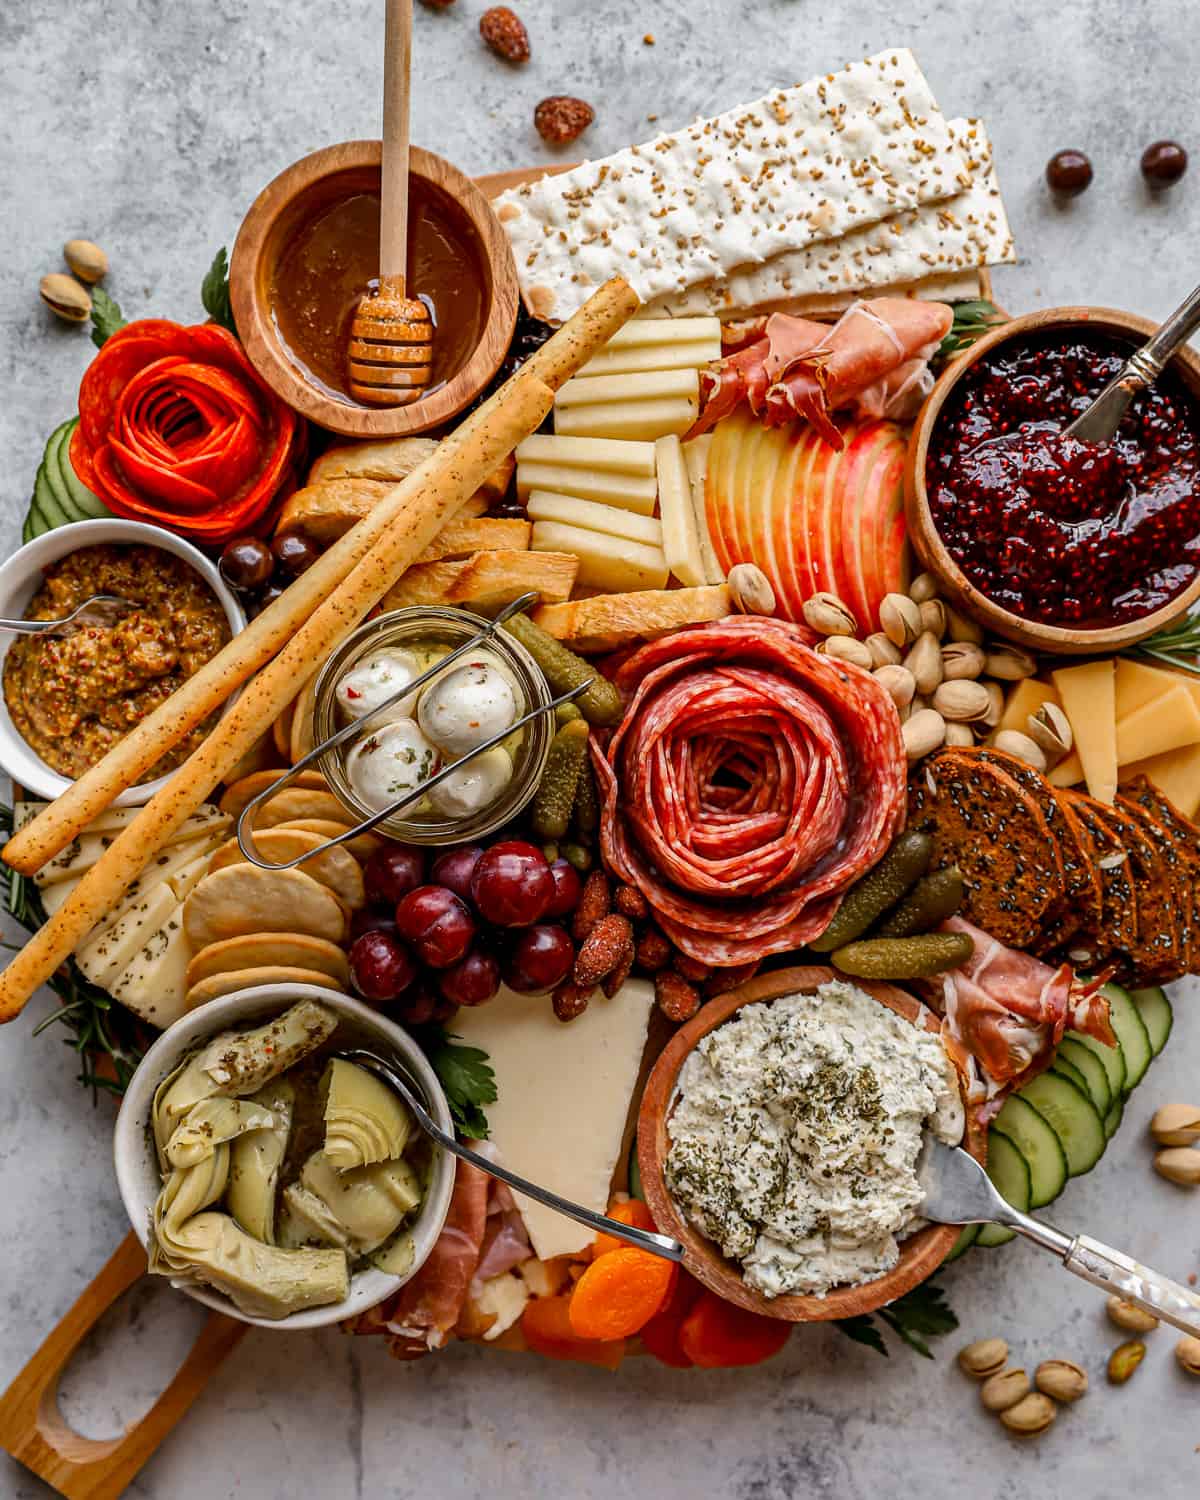 Overhead view of a beautiful charcuterie board, filled with a variety of meats and cheeses, crackers, dips and spreads, vegetables and fruits, nuts, and more.